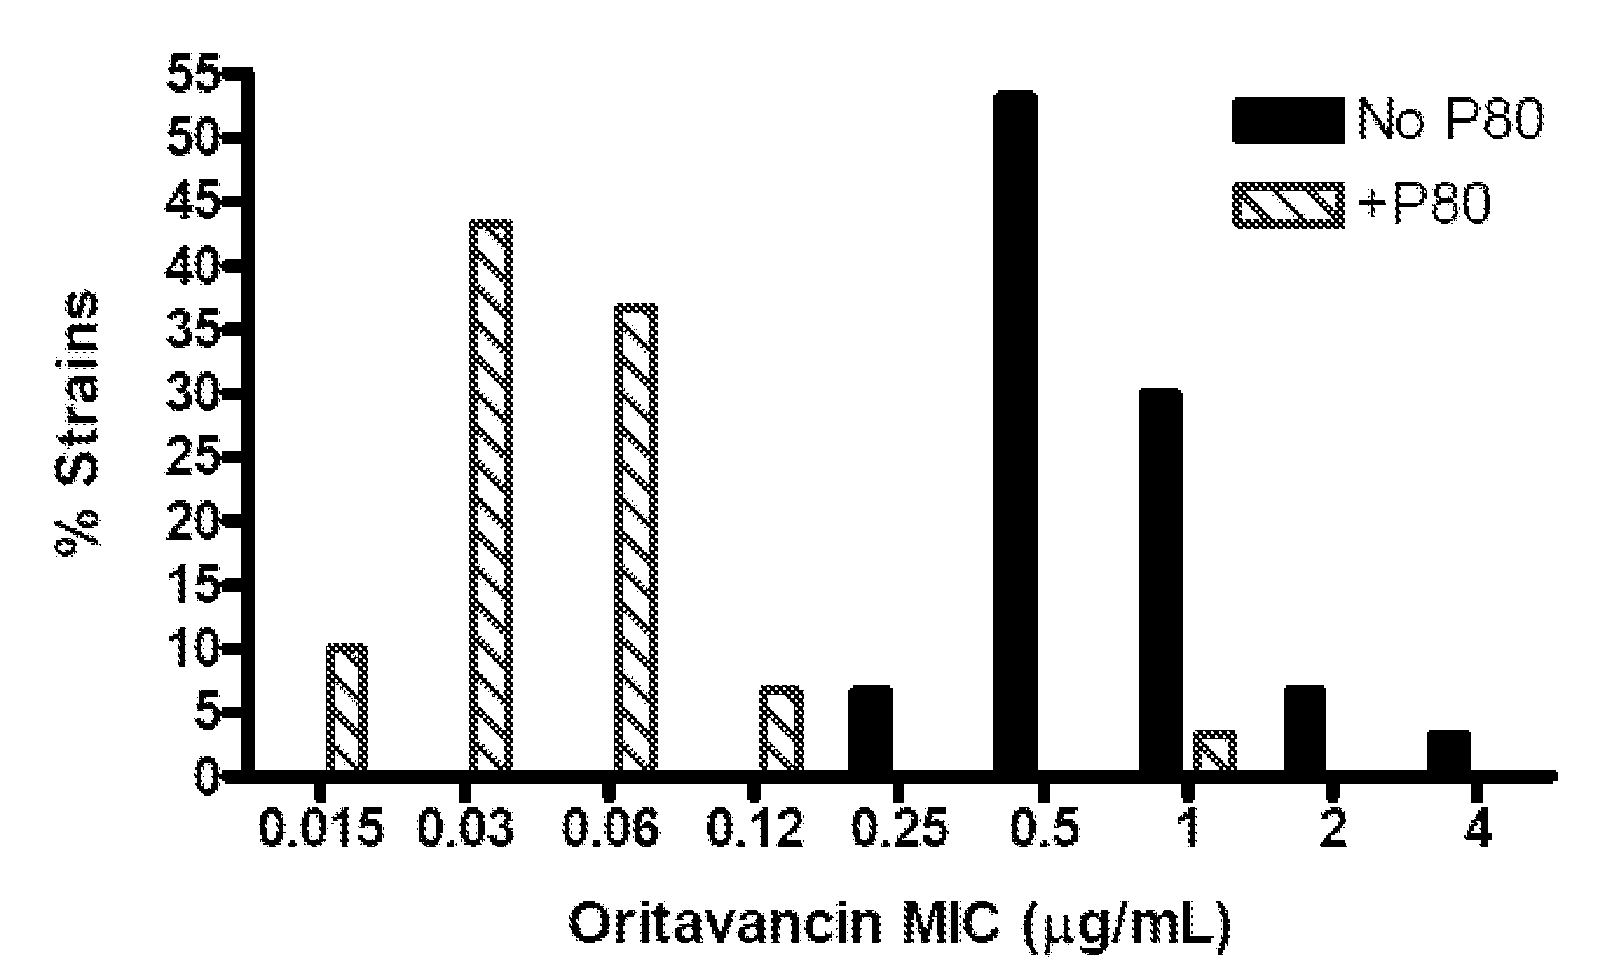 Use of oritavancin for prevention and treatment of anthrax